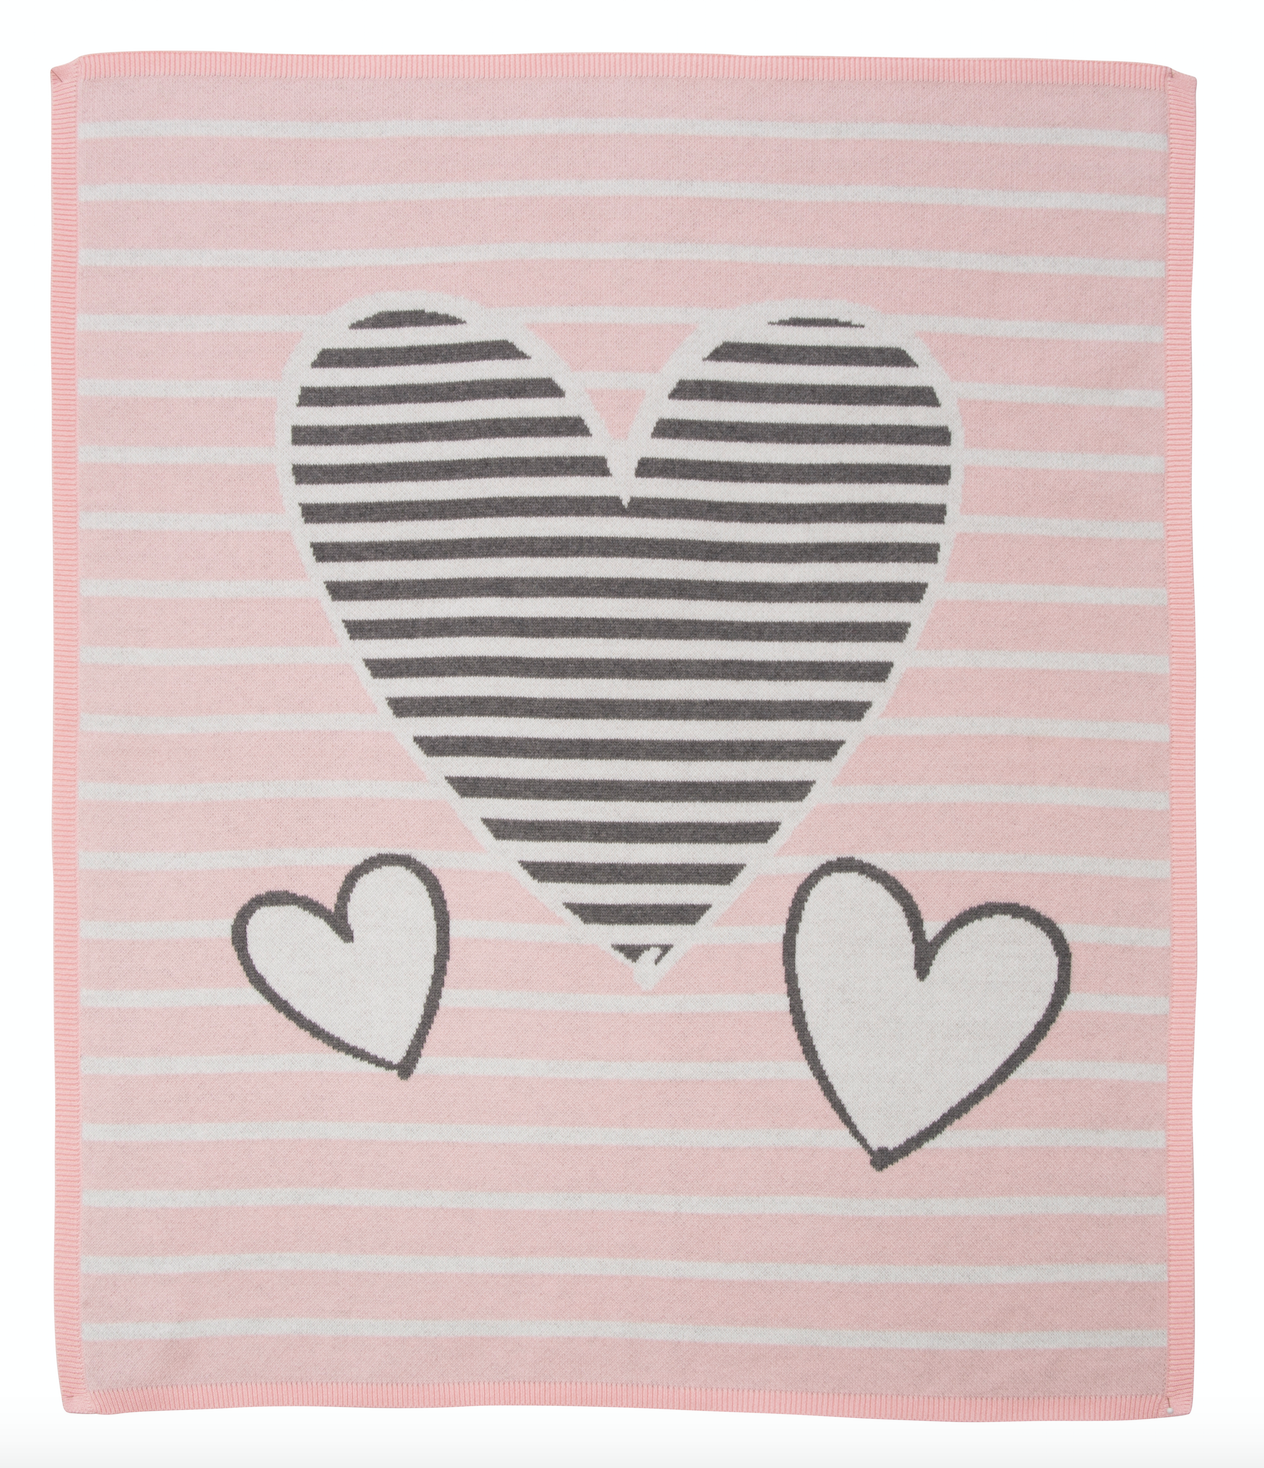 Machine washable cashmere and cotton blend super cozy striped heart blanket sold by Lucky Jade Kids. pink heart nursery blanket cashmere baby blanket soft baby blanket #luckyjadekids #kidsclothingboutique #babyoutifts #kidsclothes #matchingdresses